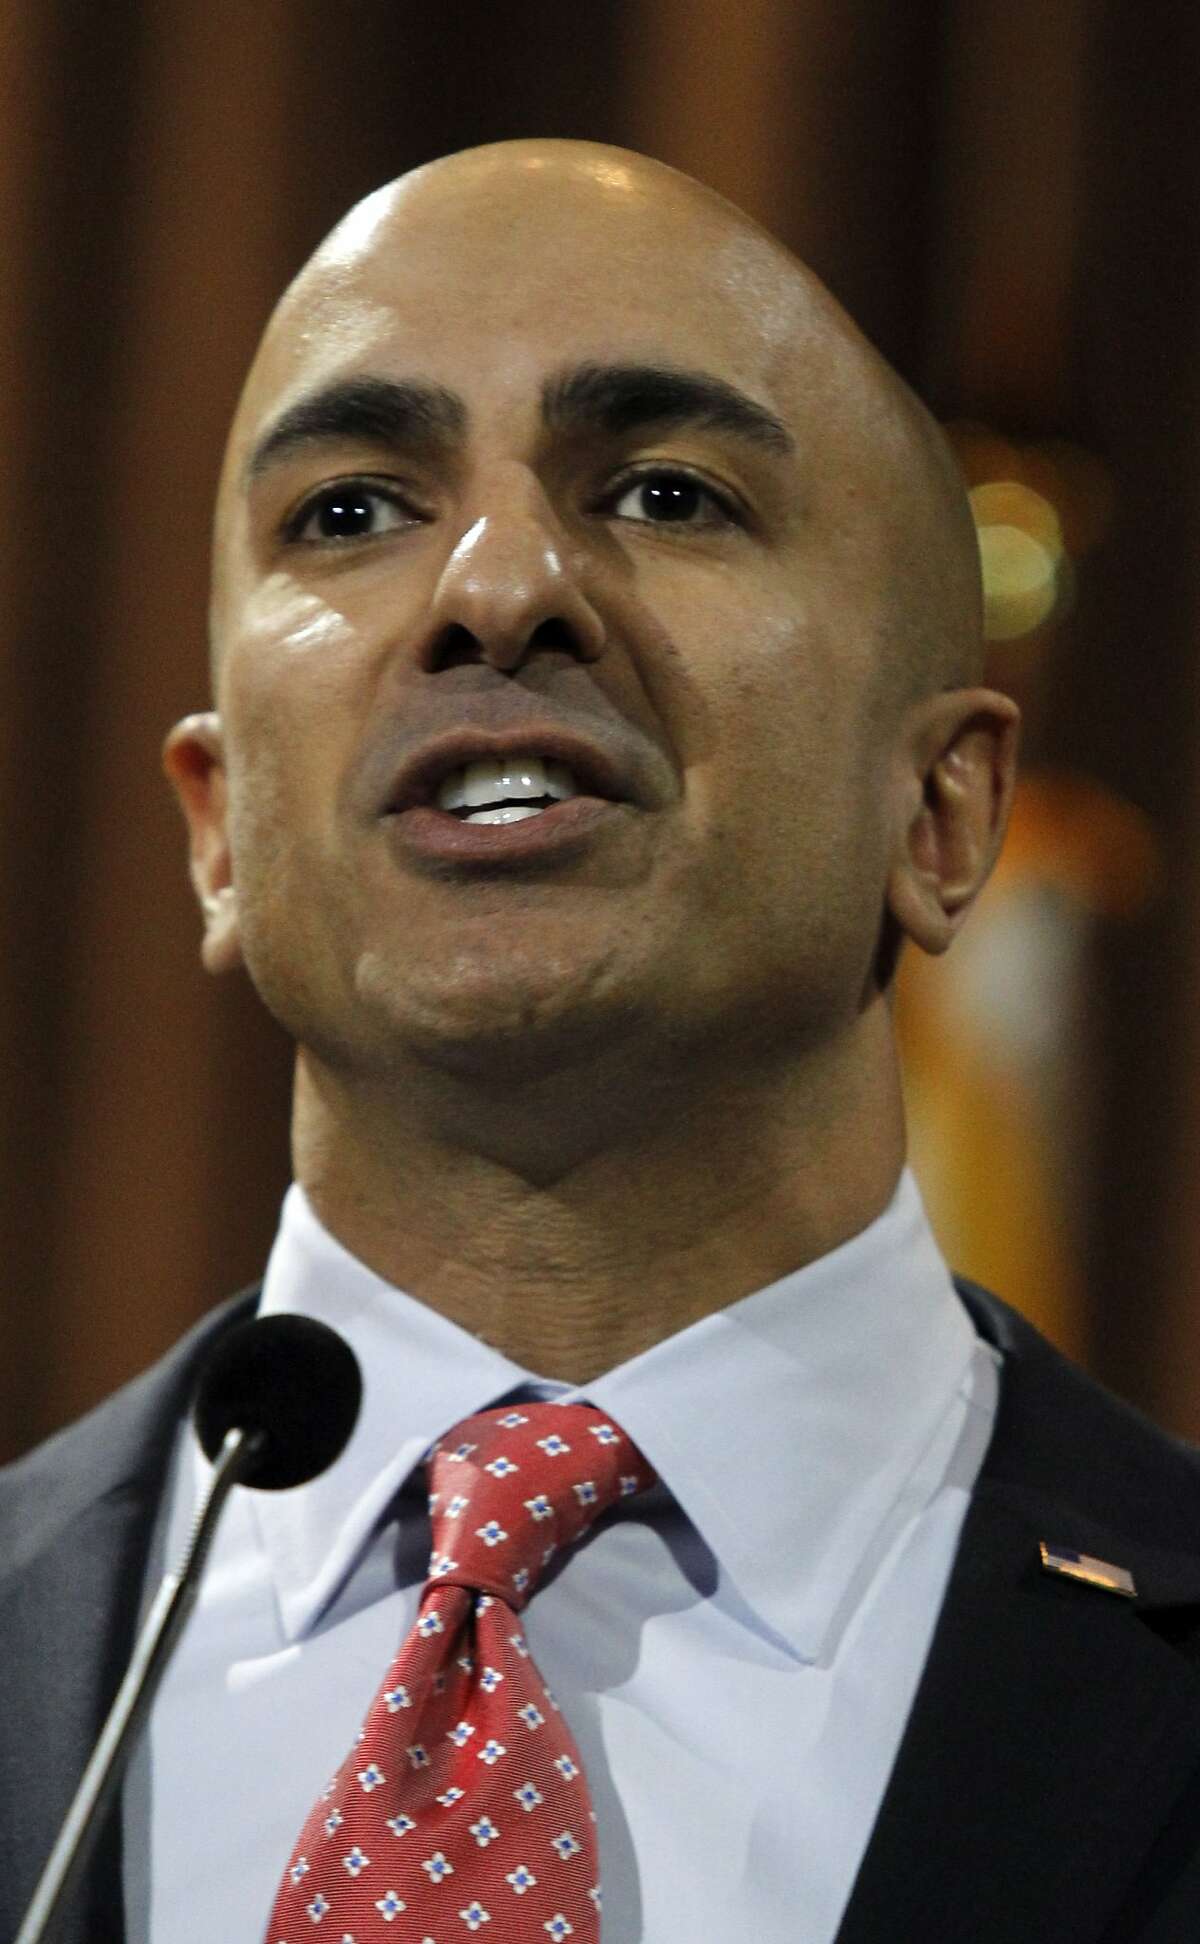 California Republican gubernatorial candidate Neel Kashkari speaks at a news conference on Wednesday, June 4, 2014, in the Corona Del Mar area of Newport Beach, Calif. Kashkari won his party's primary, advancing to the general election to face Gov. Jerry Brown in November 2014. (AP Photo/Alex Gallardo)